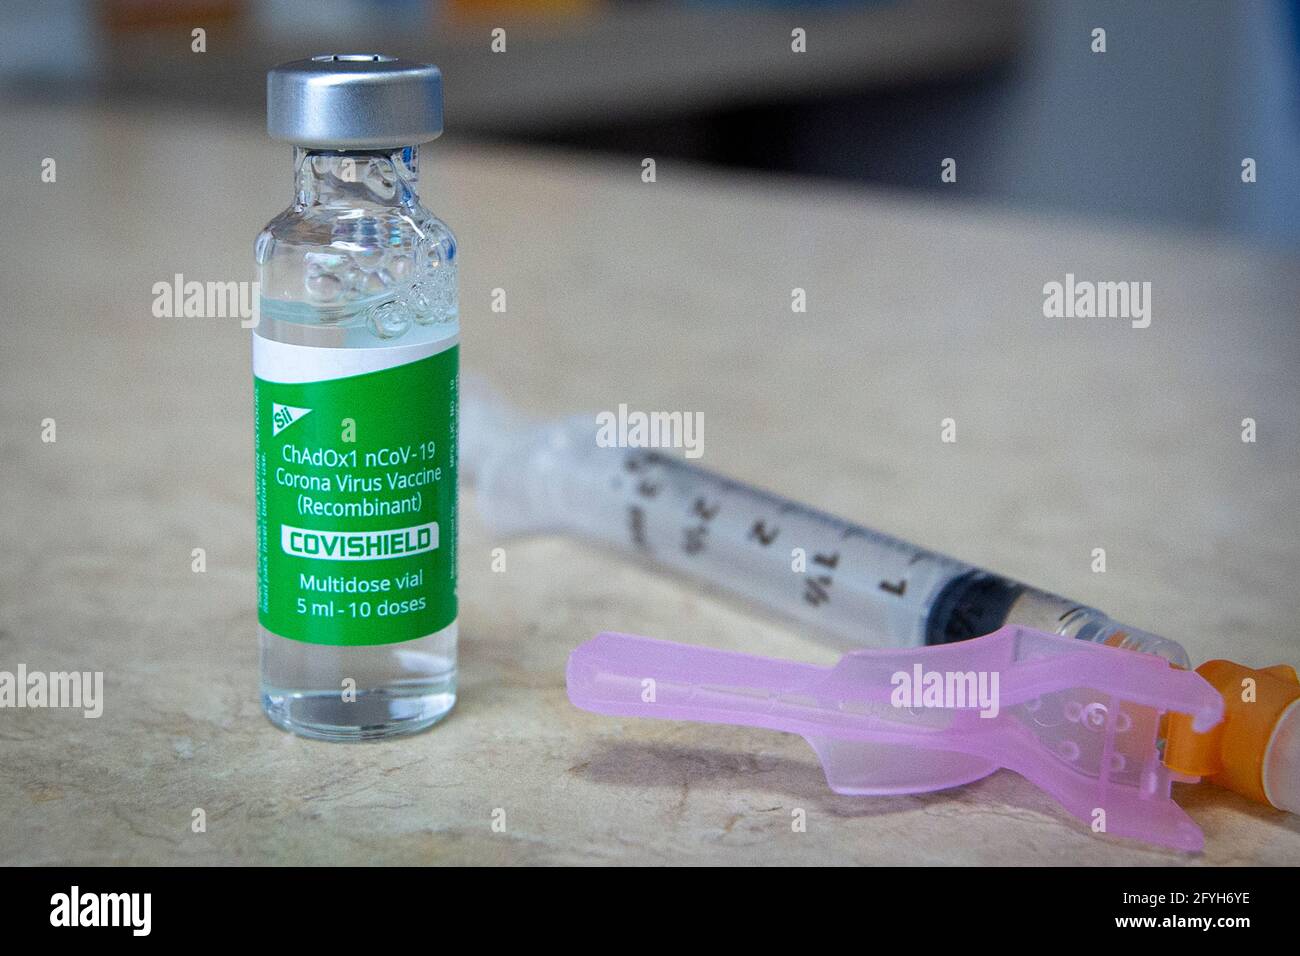 A syringe with the AstraZeneca COVID-19 vaccine before use at a pharmacy in Kingston, Ontario on Thursday, March 18, 2021, as the COVID-19 pandemic co Stock Photo